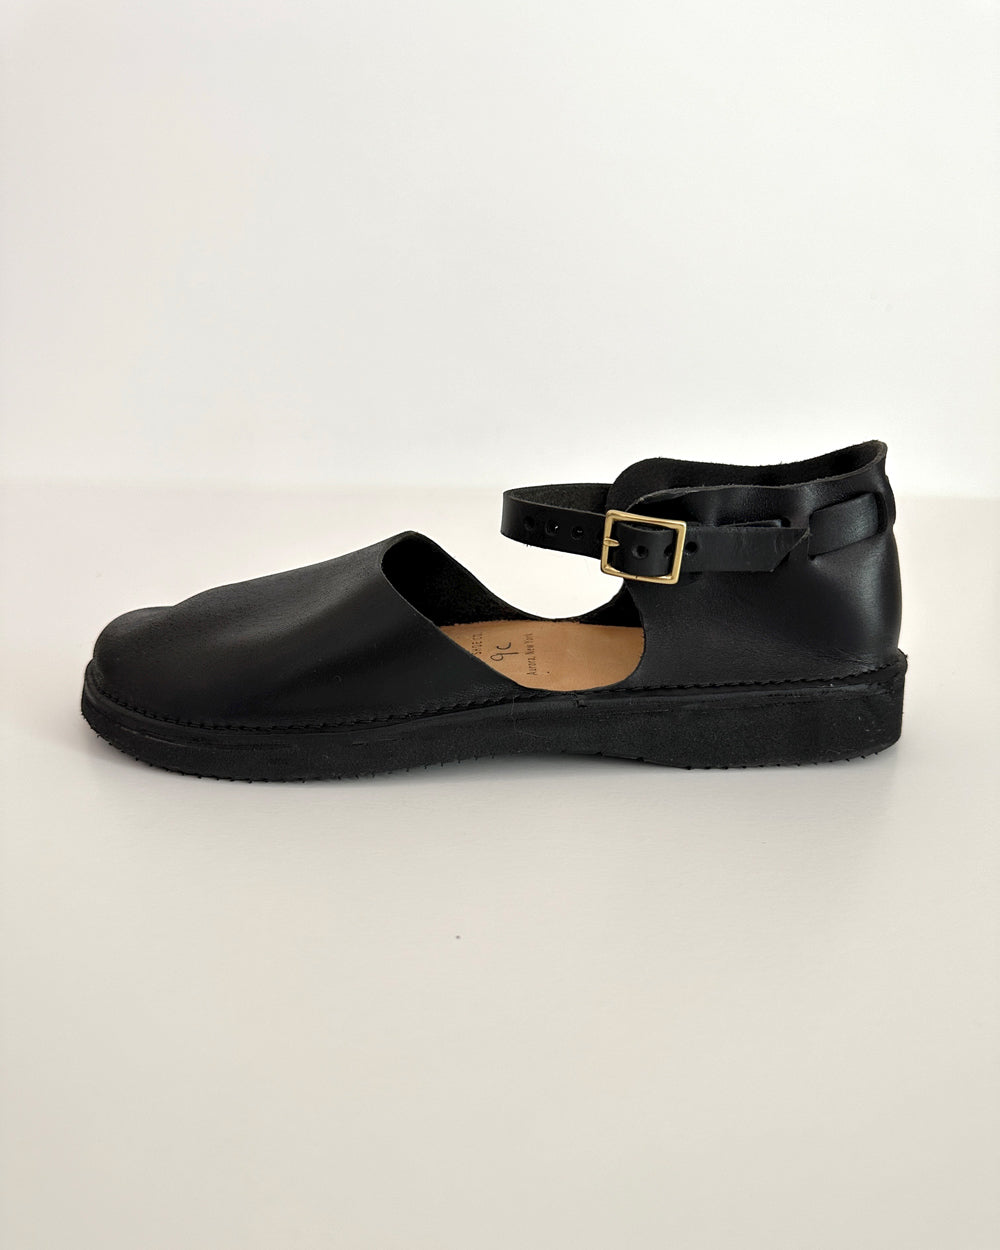 Pyne & Smith Clothiers Black Leather Mary Jane Shoes